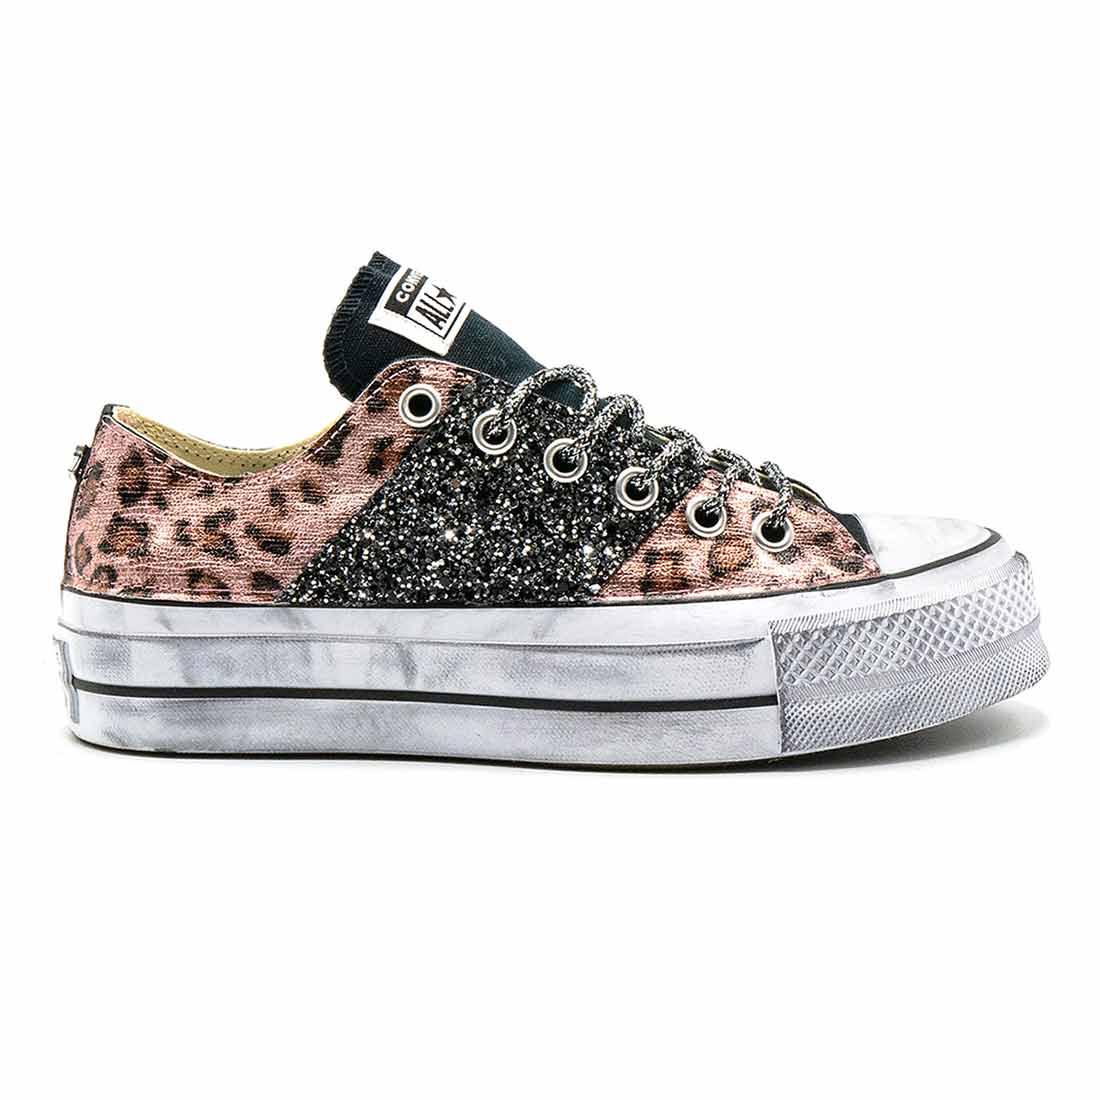 converse all star bianche basse pelle rosa